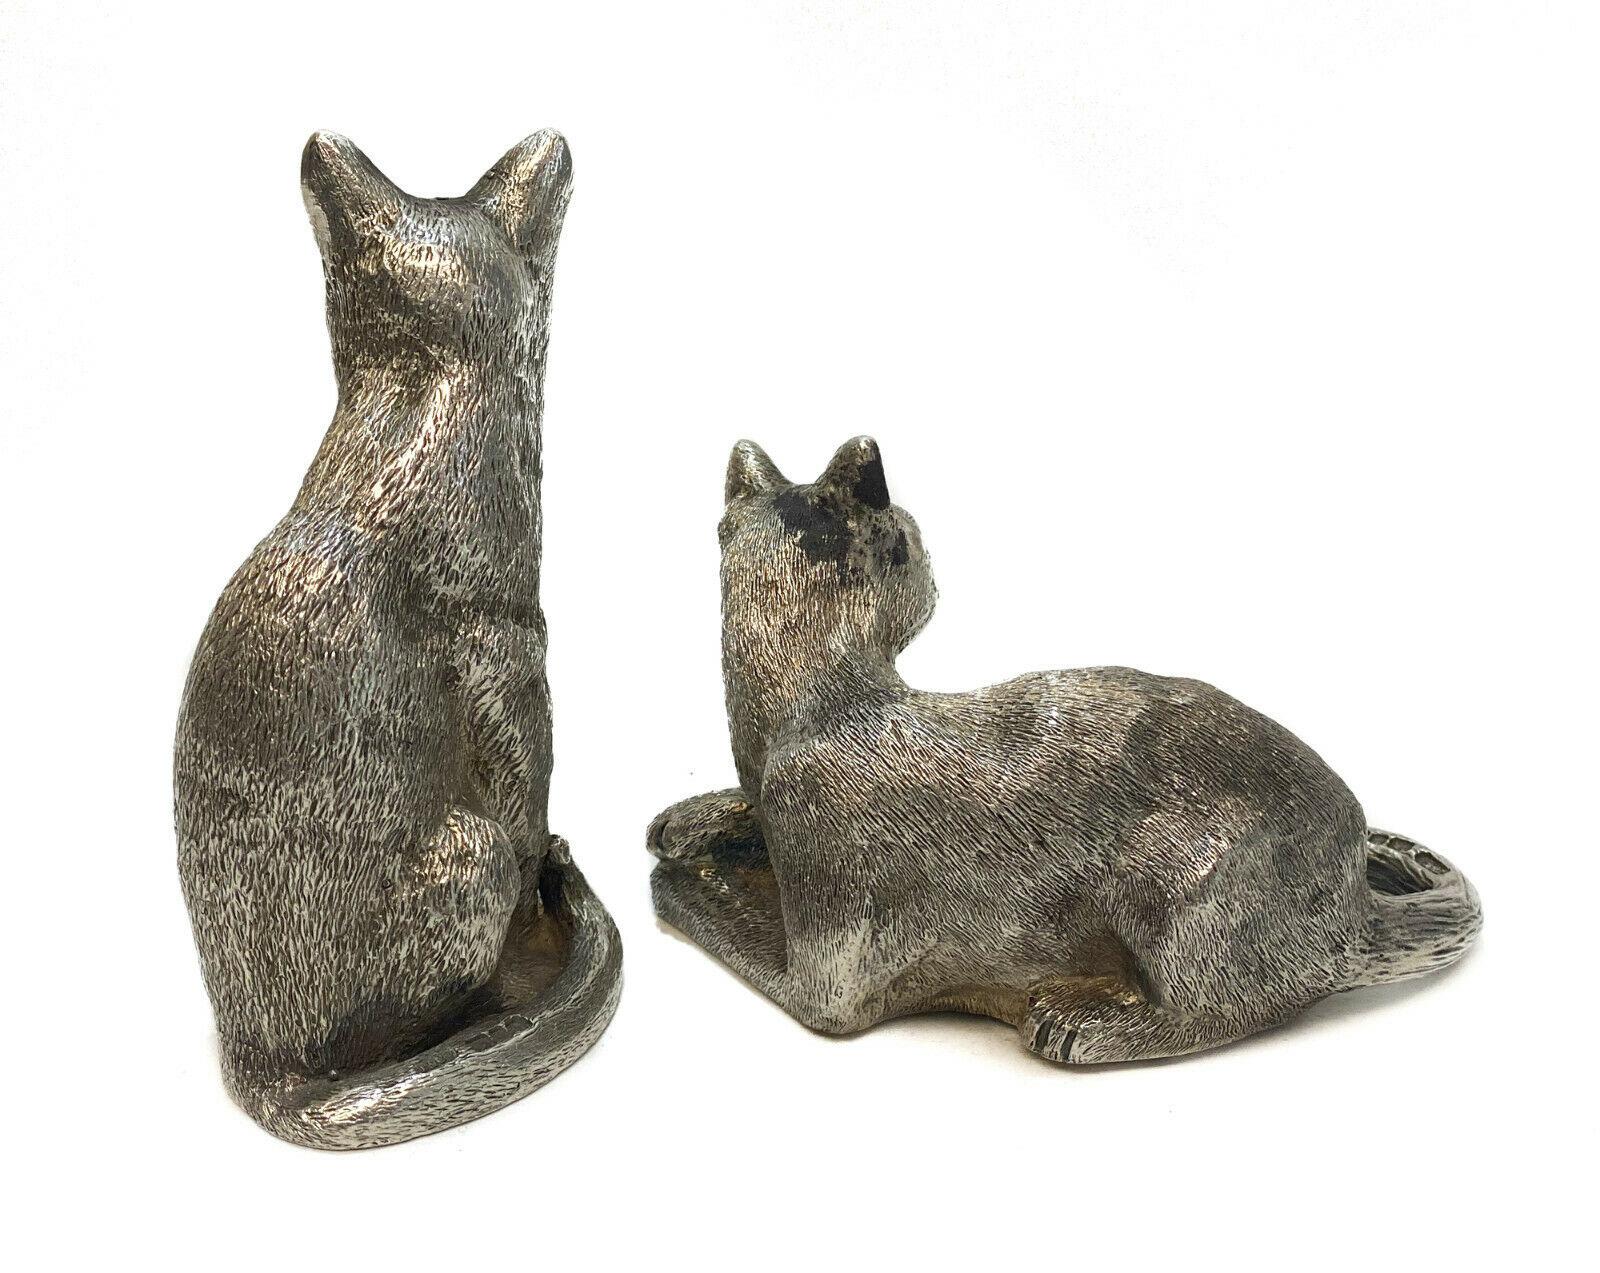 Tiffany & Co. London sterling silver cat salt and pepper shakers, 1988. Hand chased figural cats, one sitting up and one lounging. Tiffany & Co. sterling silver hallmarks to the tails. 

Weight Approx., 8.4 ozt 

Measures Approx., Taller: 1.5